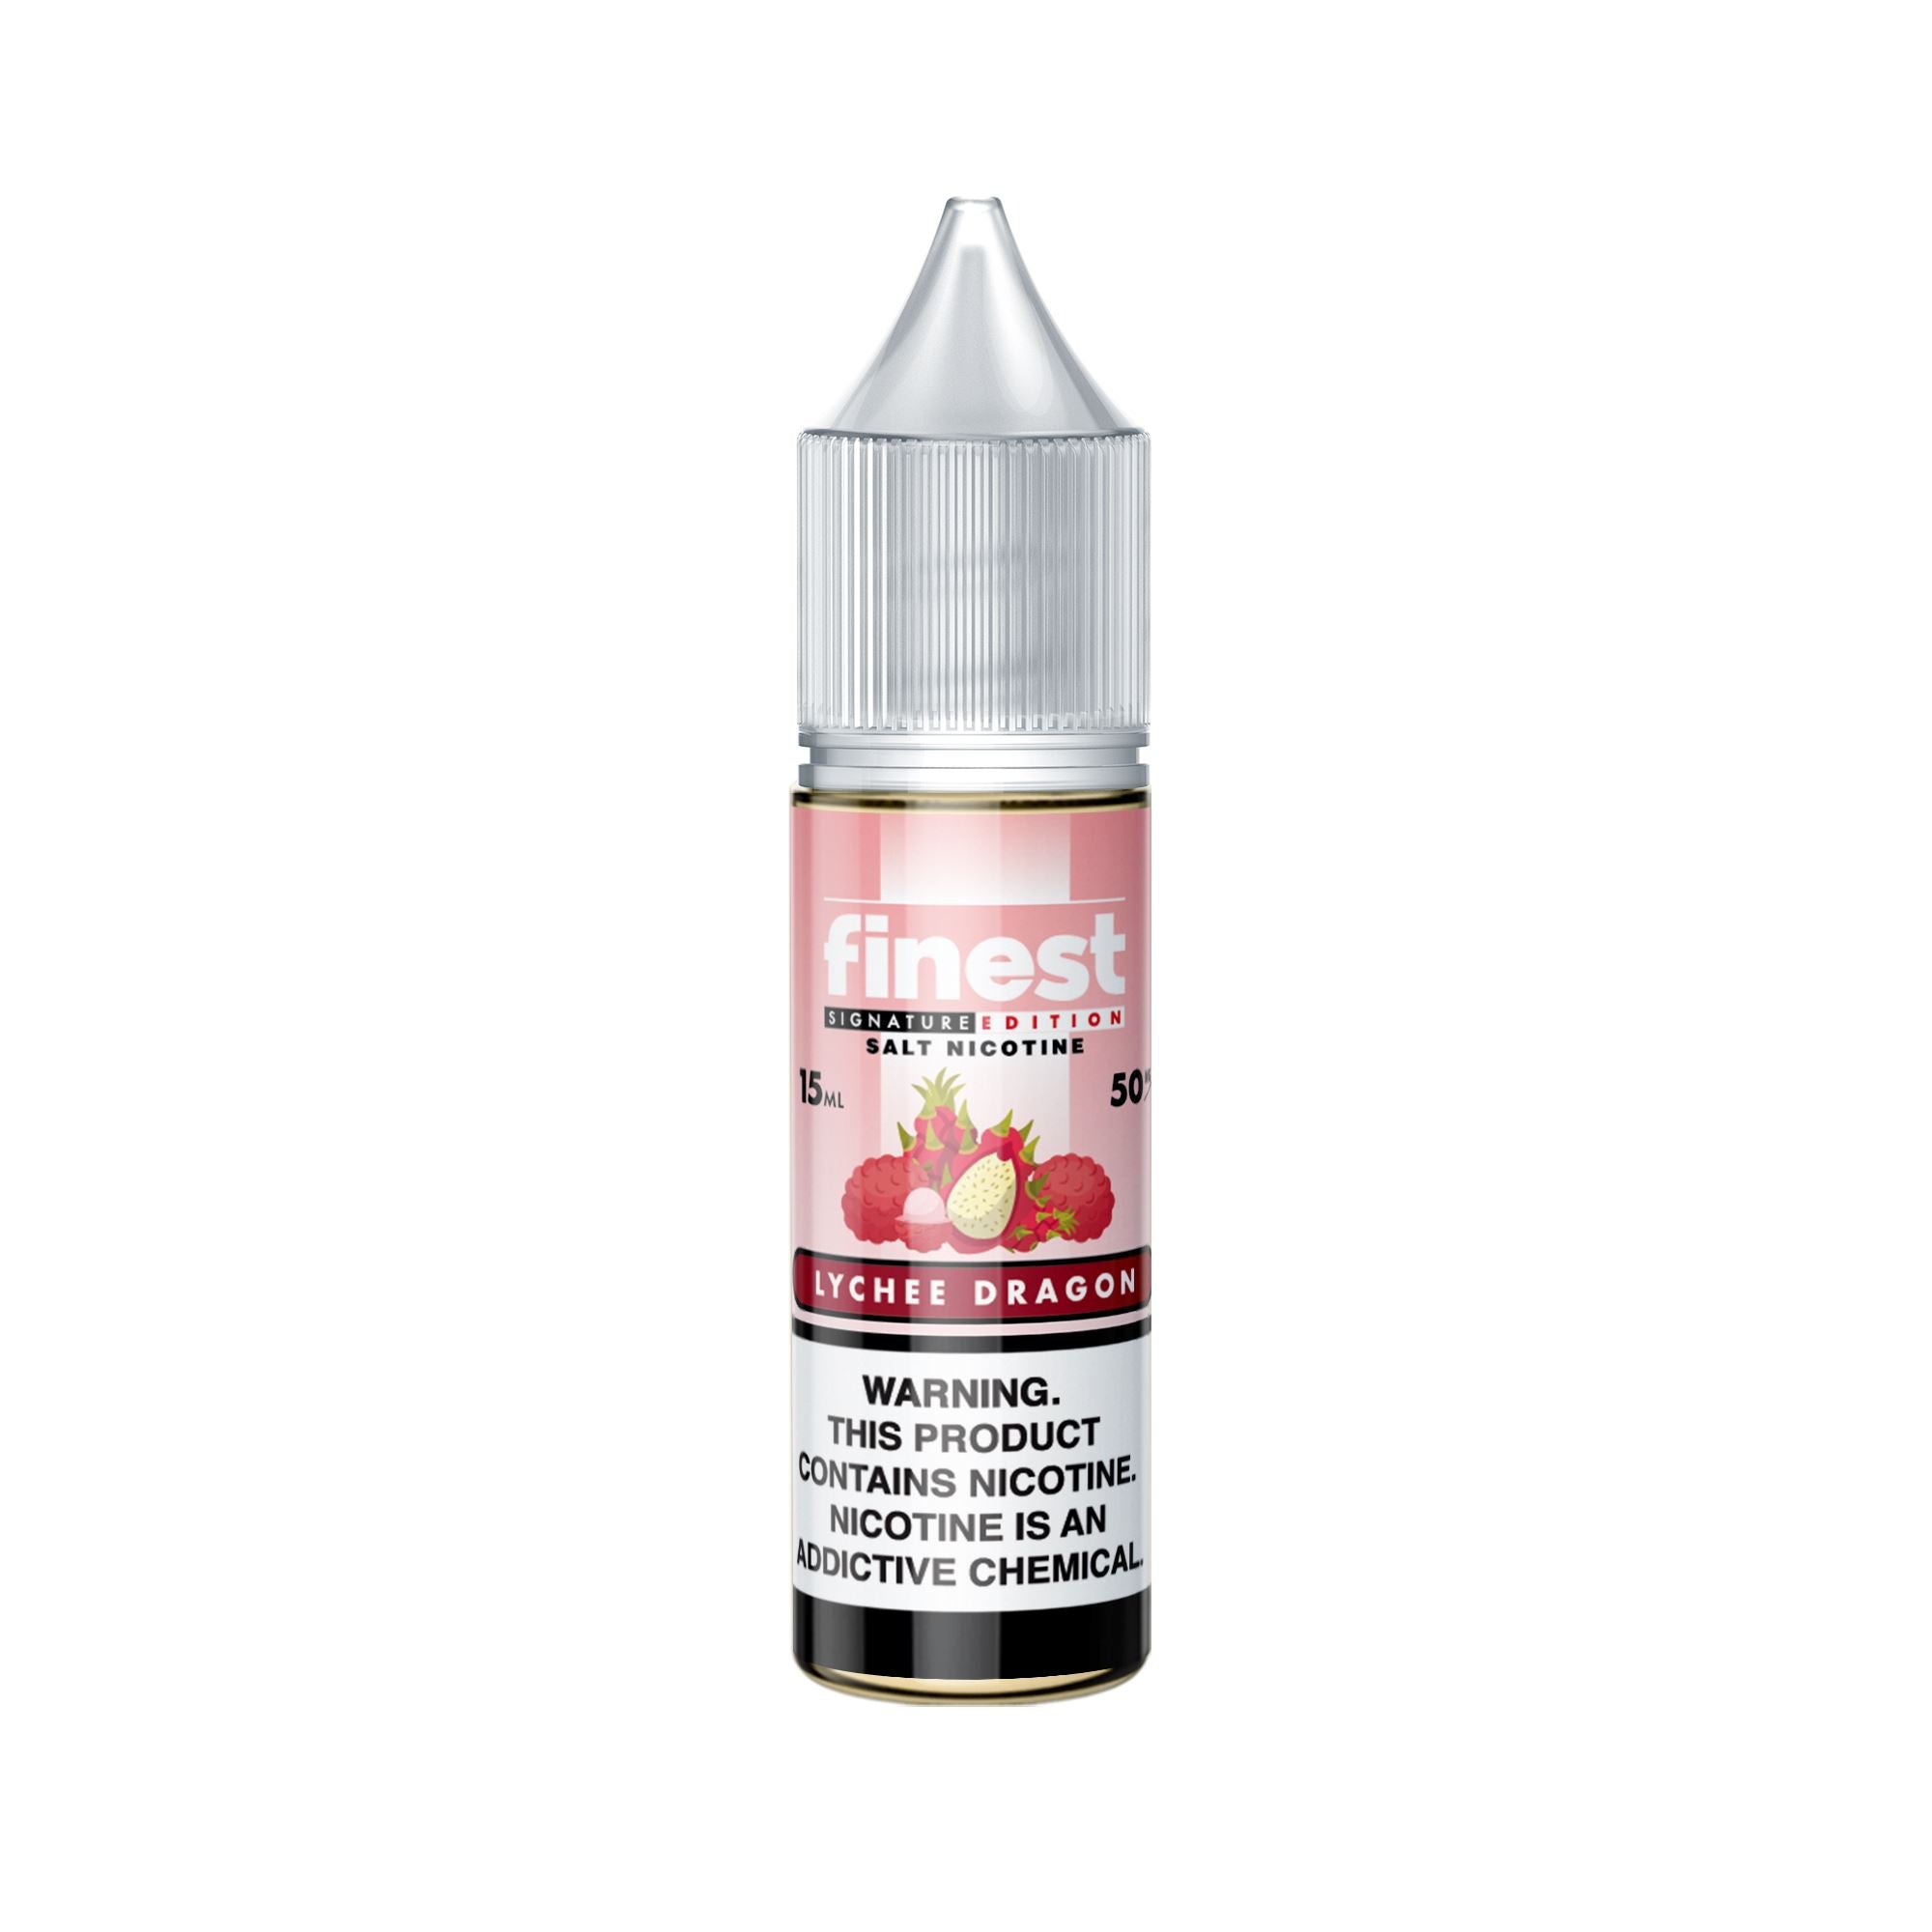 The Finest Saltnic 15 Series - Lychee Dragon - Vapoureyes